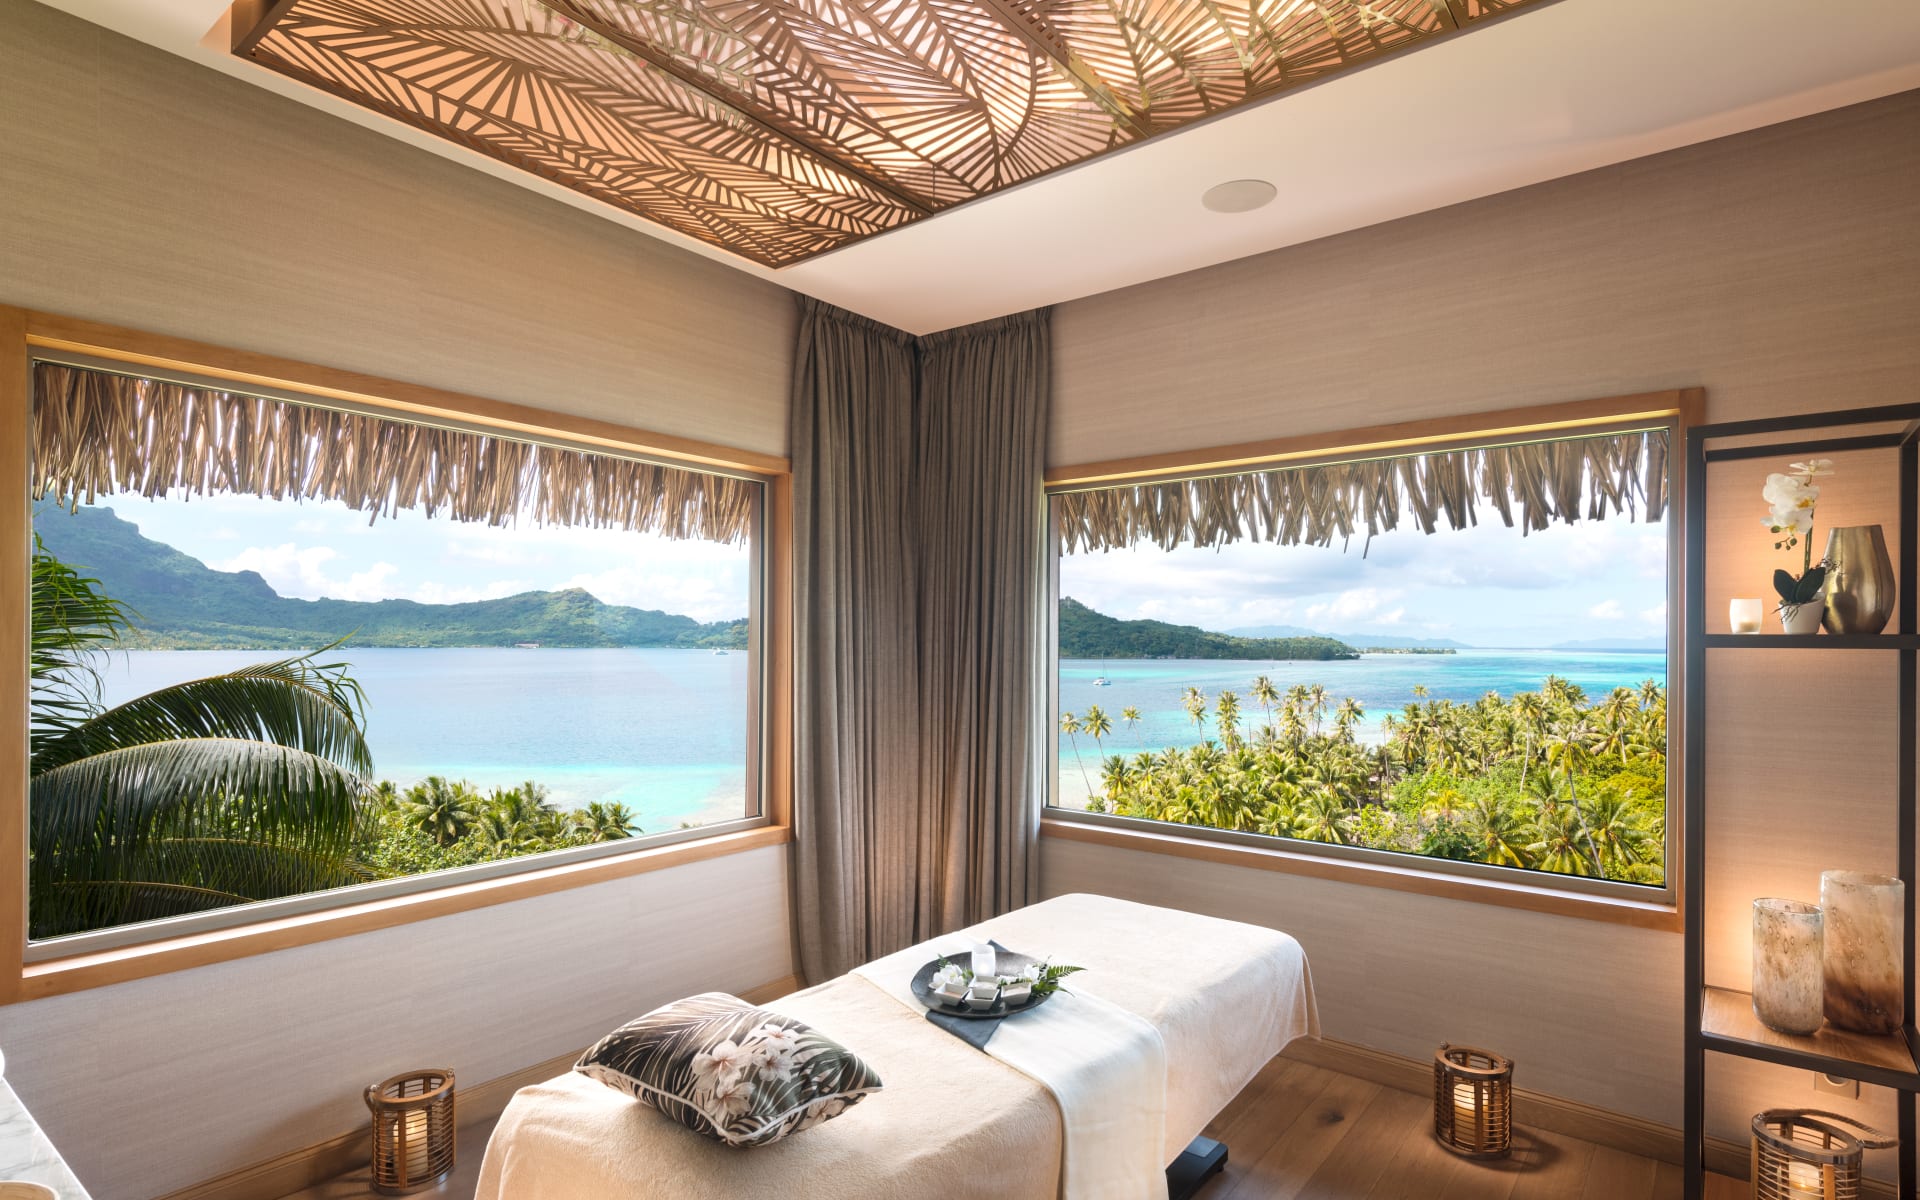 The spa room has a single bed with a pillow, surrounded by candles and two windows with ocean views. 